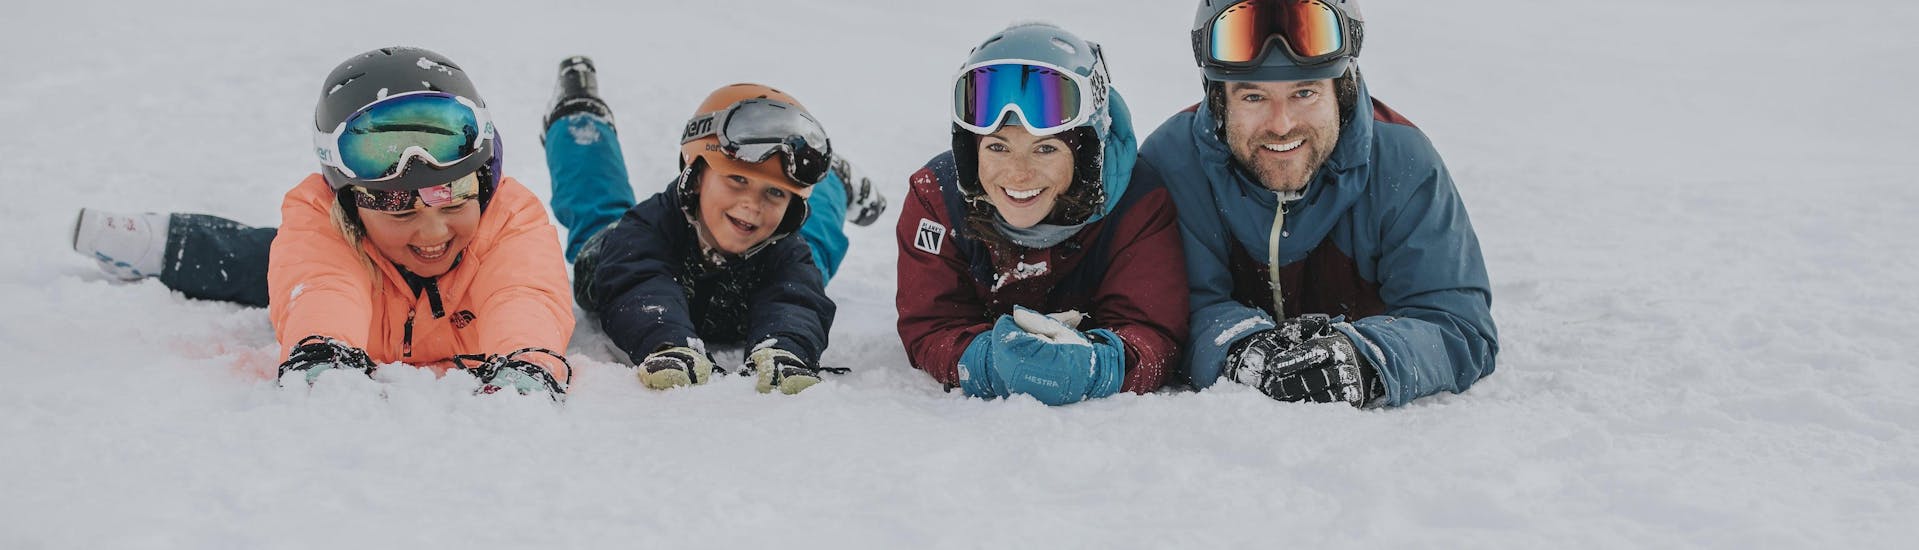 Kids Ski Lessons (5-17 years) - All Levels - With Transfer.